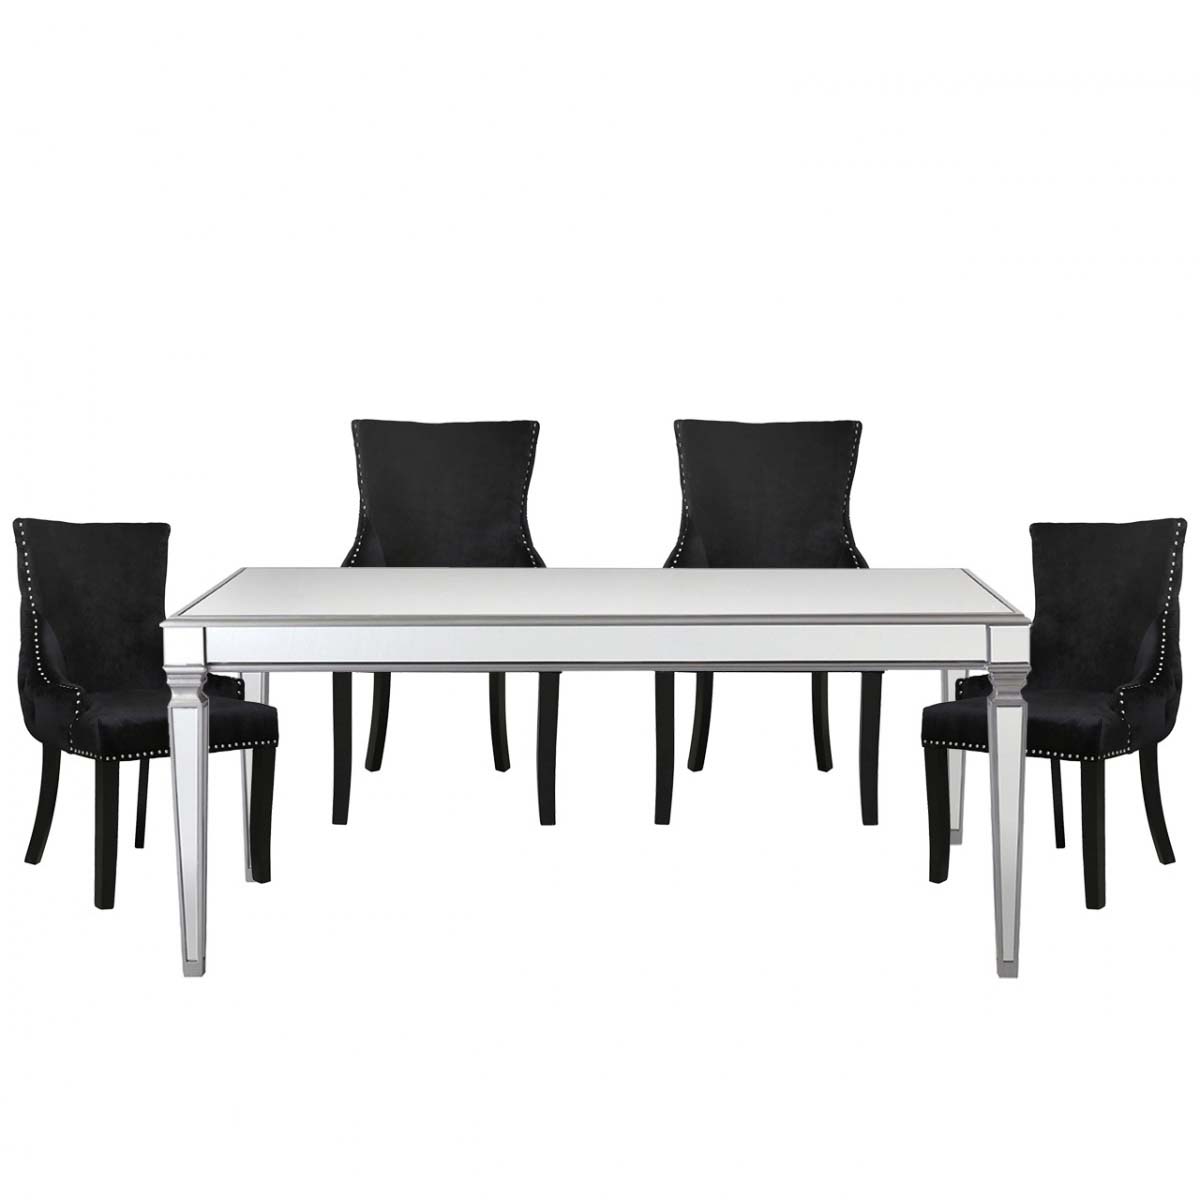 Andreas Silver Trim Mirrored 5 Piece Set with Black Chairs